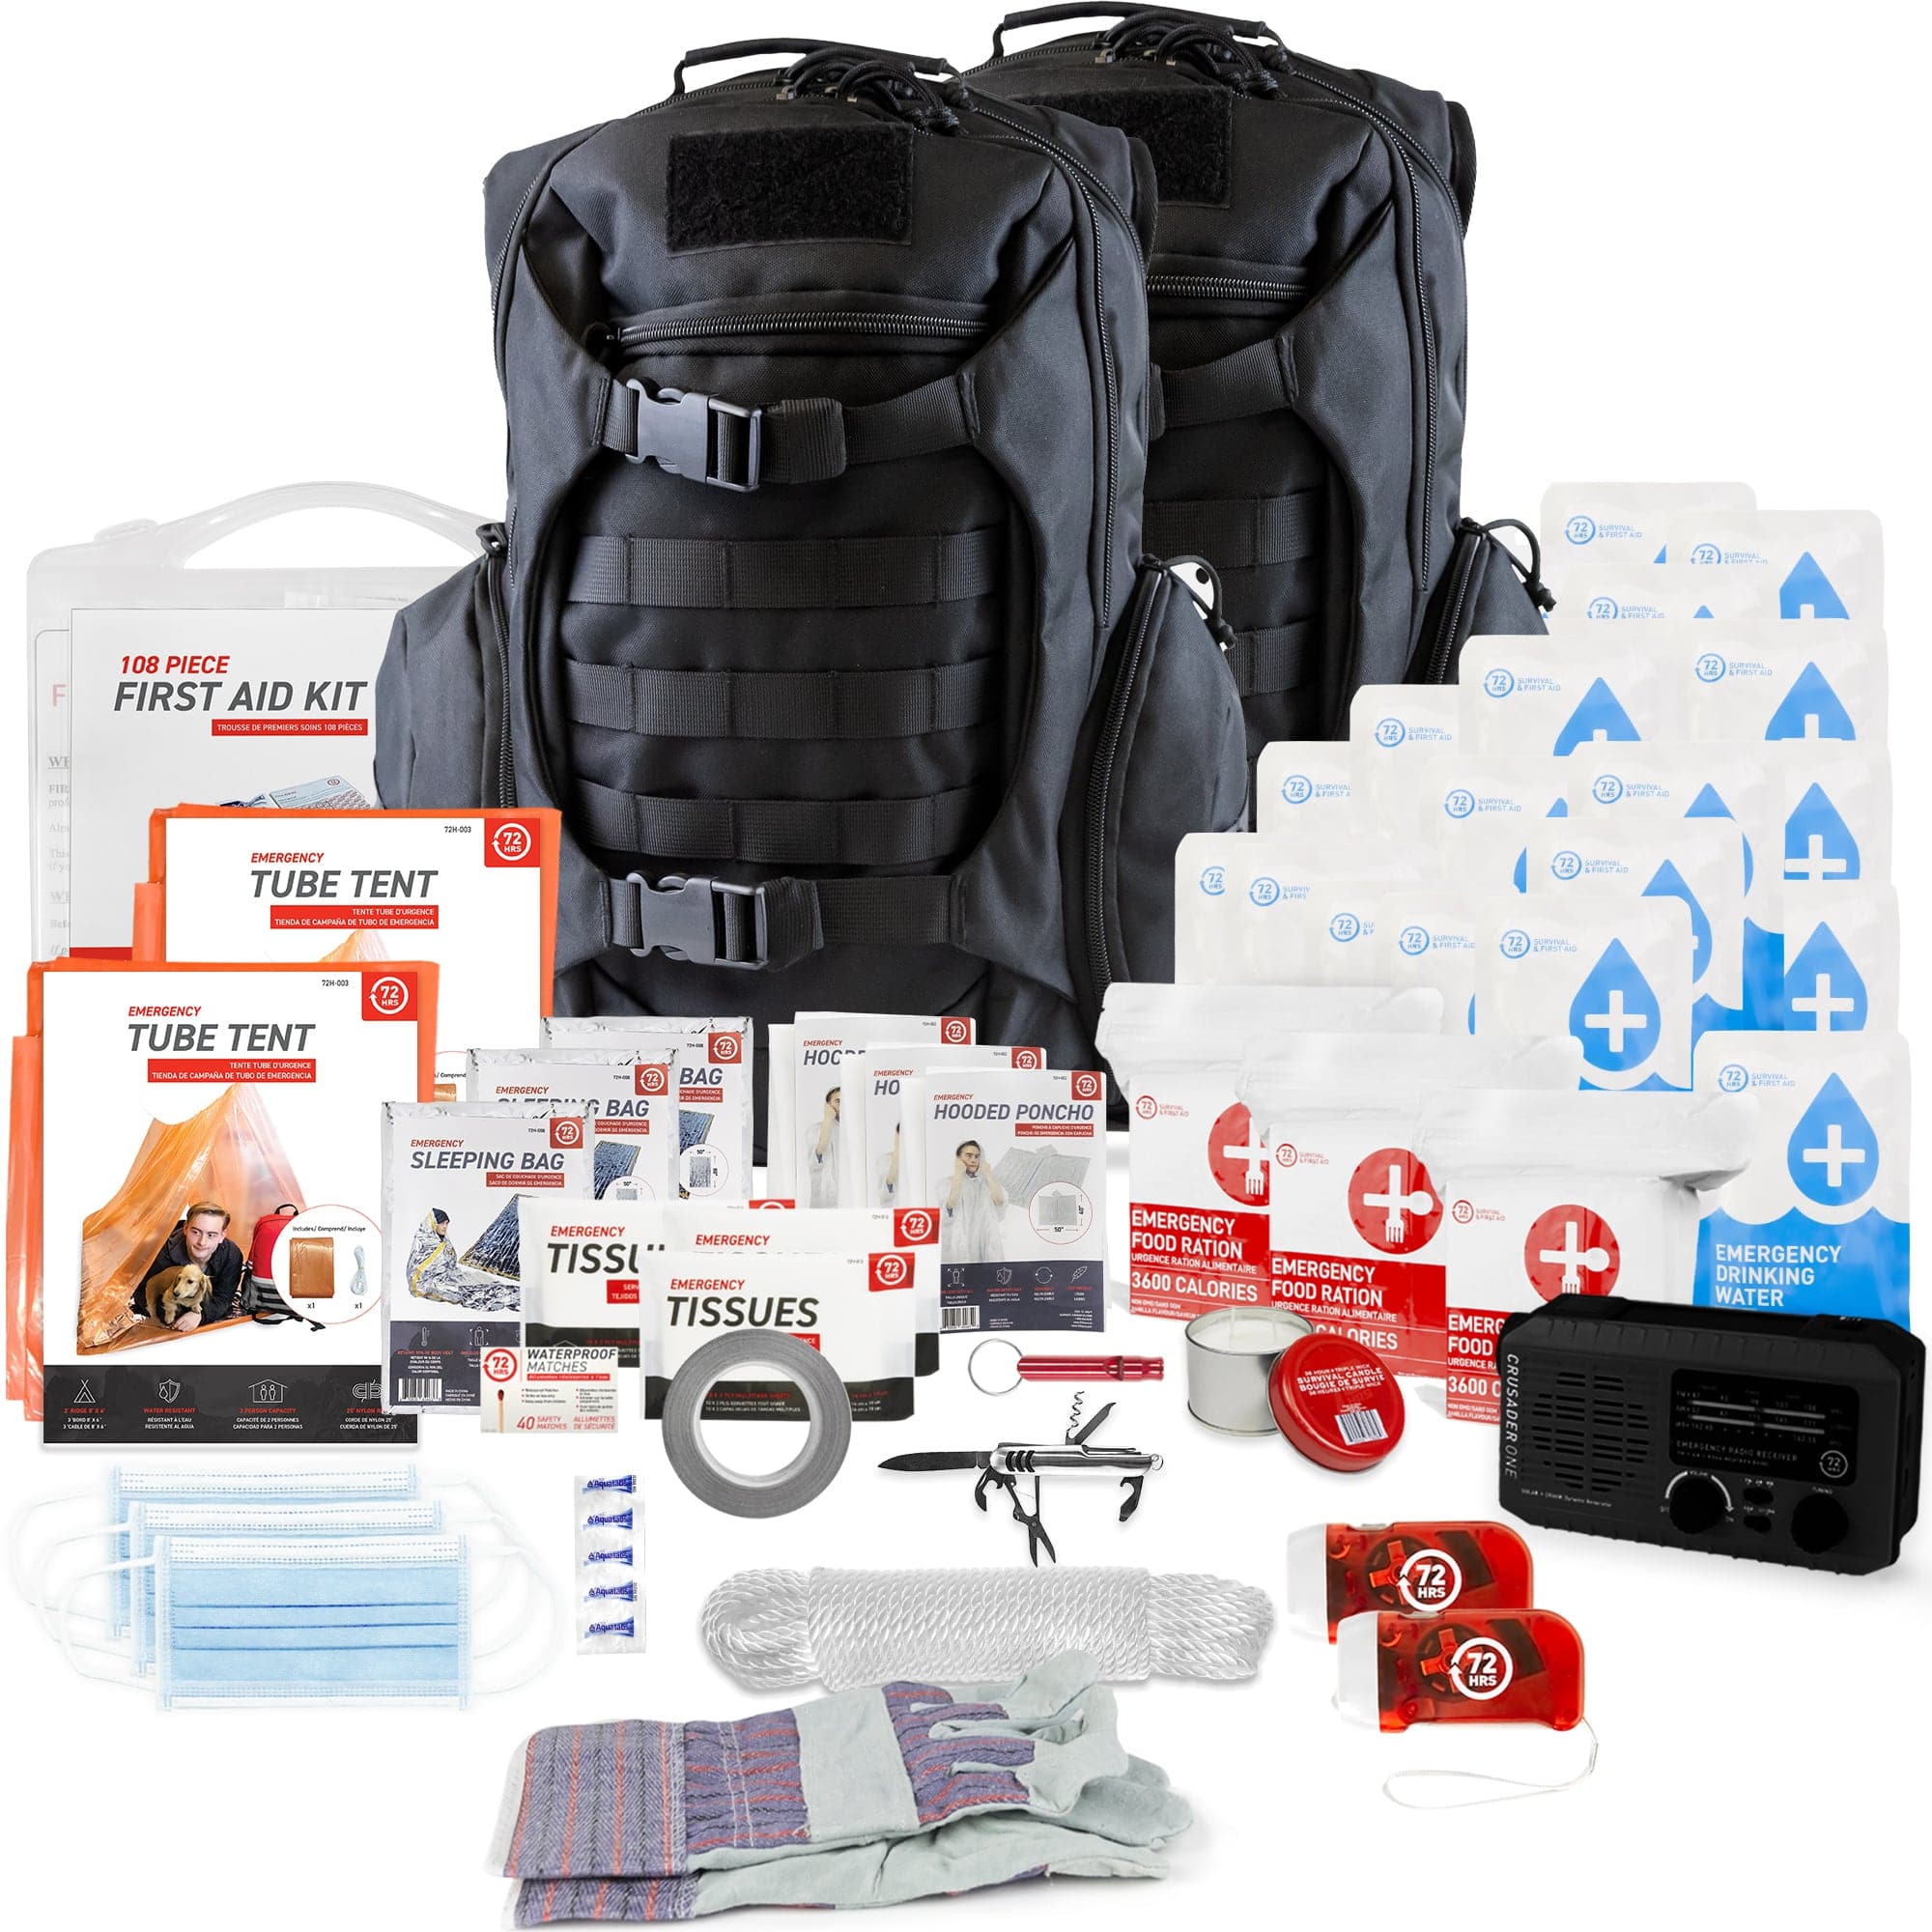 72HRS Deluxe Backpack Emergency Survival Kit - 3 Person, Tactical Black